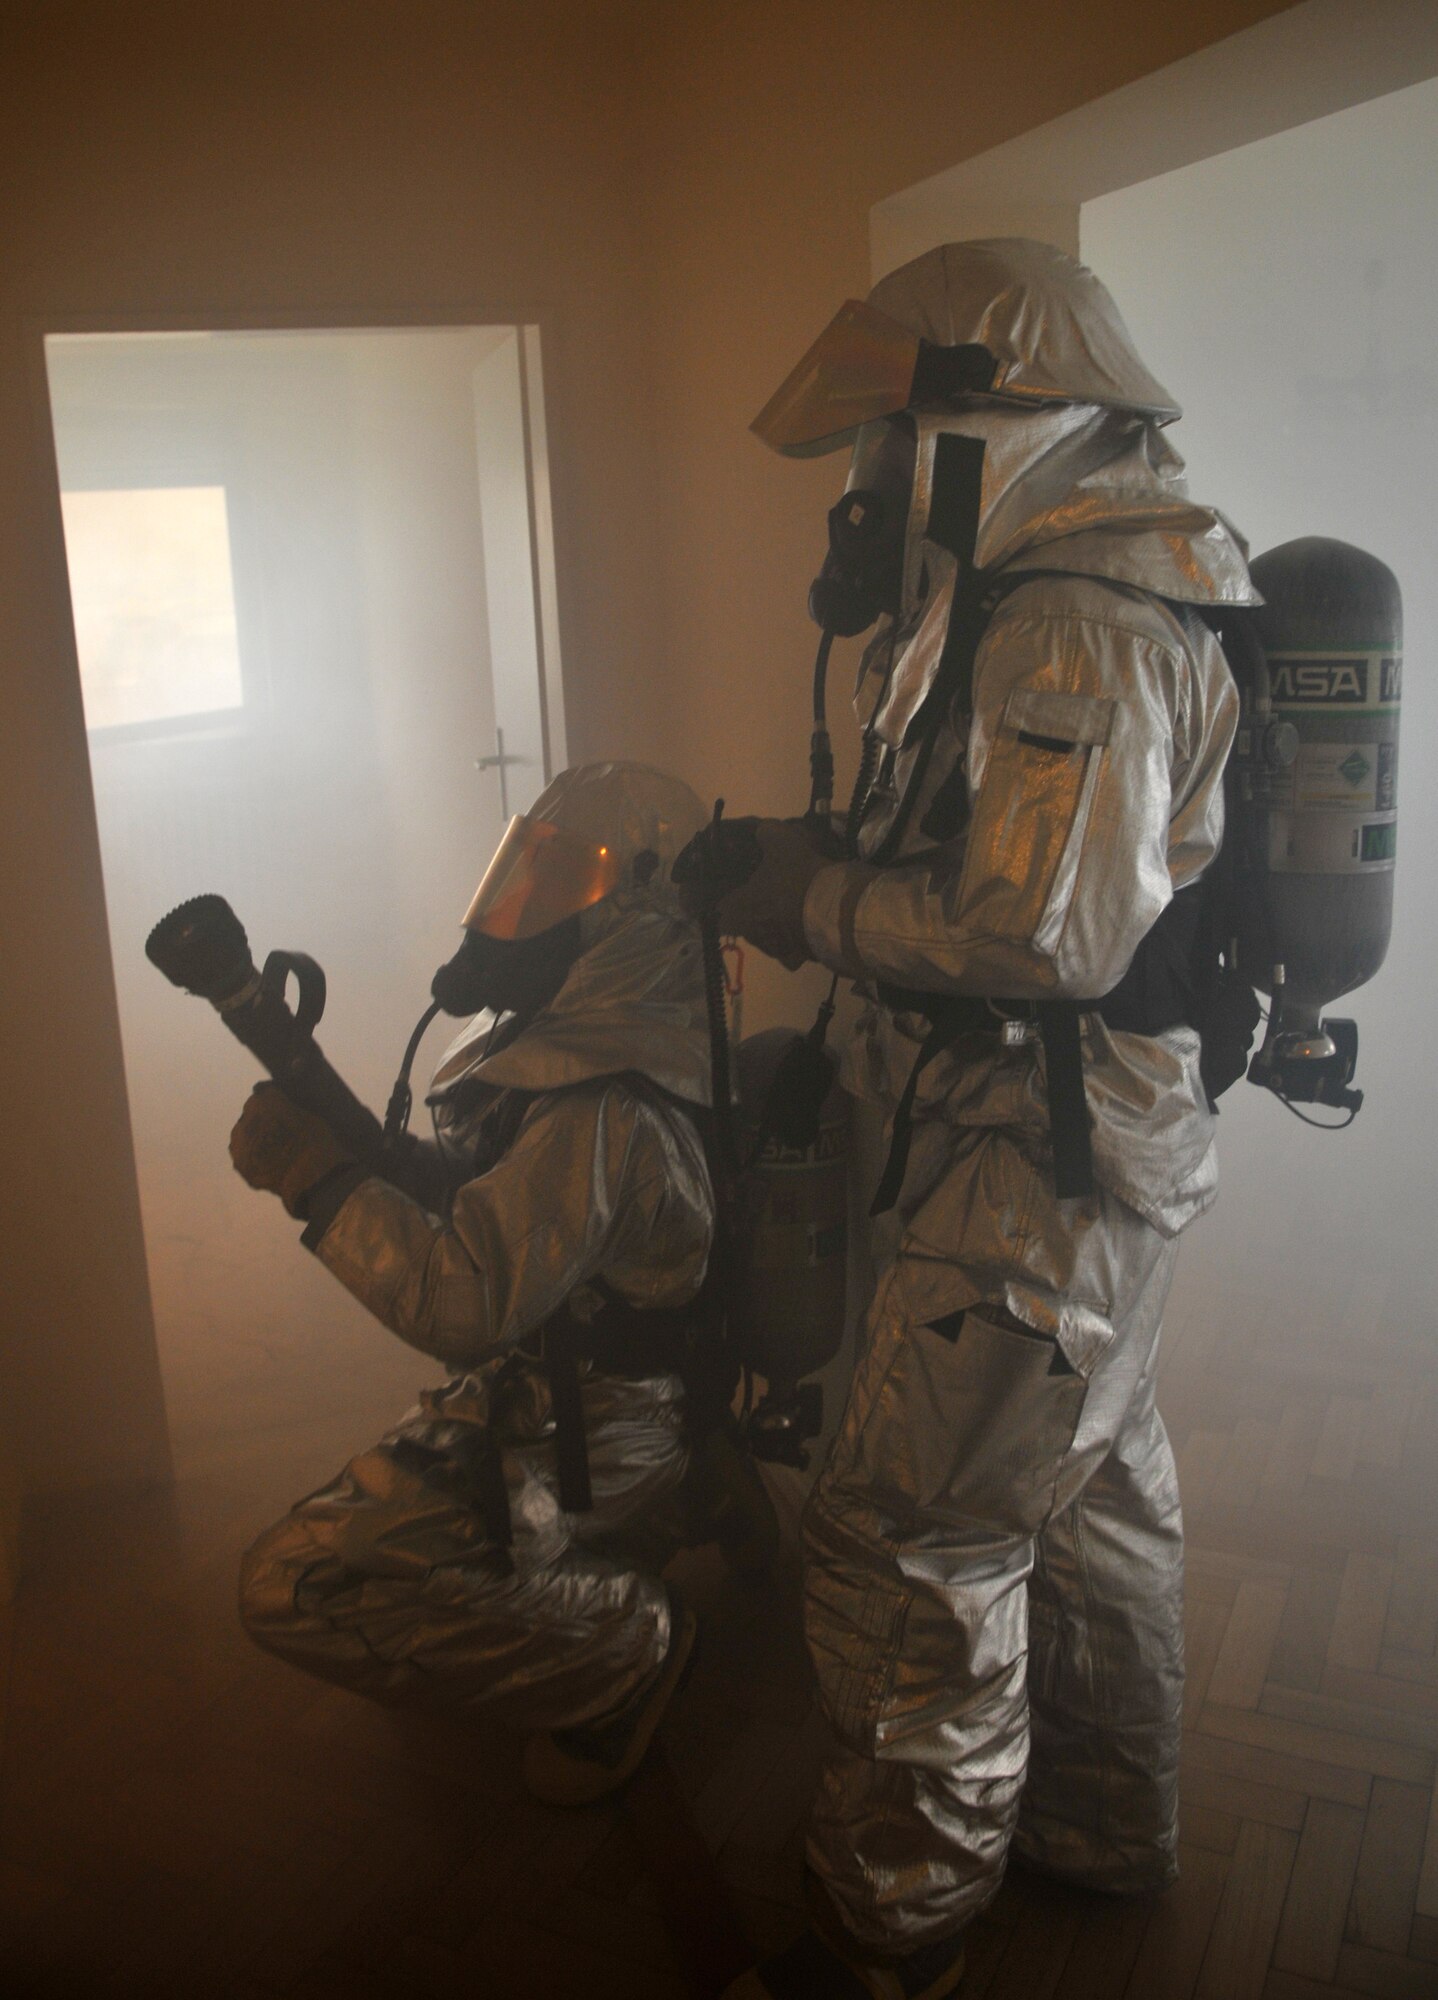 SPANGDAHLEM AIR BASE, Germany – Firefighters from the 52nd Civil Engineer Squadron respond to a simulated building fire during a mutual aid exercise at Bitburg Annex April 11. The exercise tested the 52nd Fighter Wing and Bitburg Freiwilige Feuerwehr fire departments’ ability to work together and respond to real-world fire emergencies. U.S. Air Force photo/Airman 1st Class Nick Wilson)